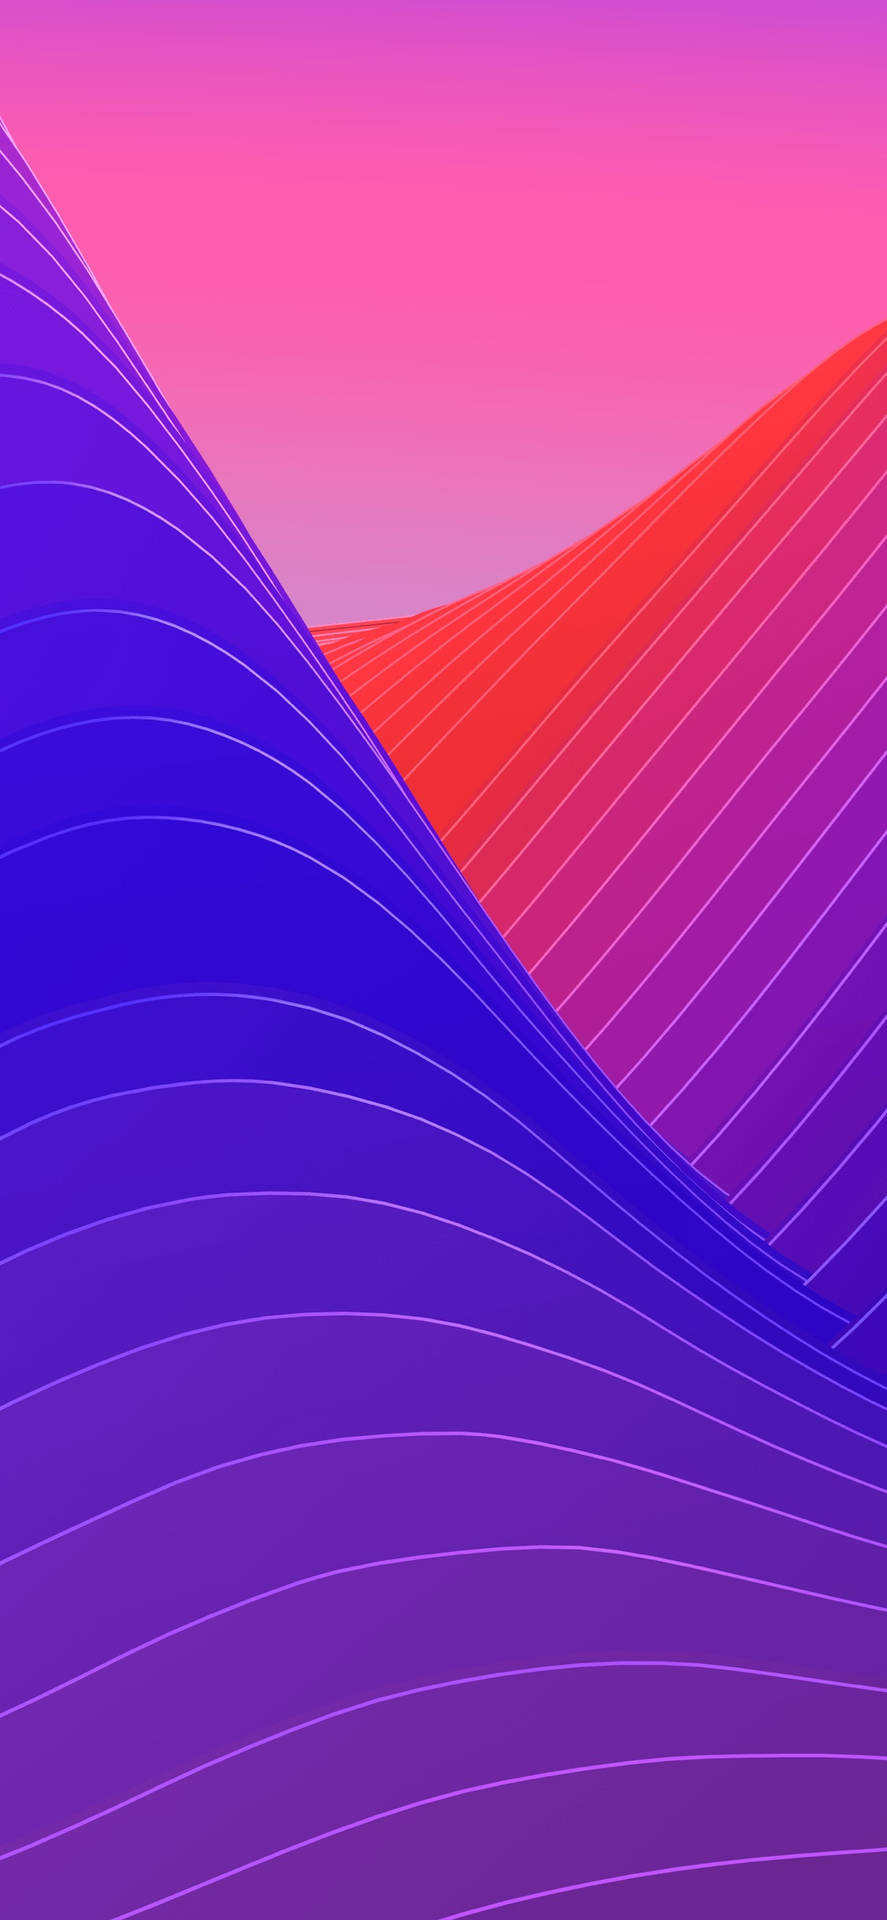 Iphone X Original Abstract Waves Background